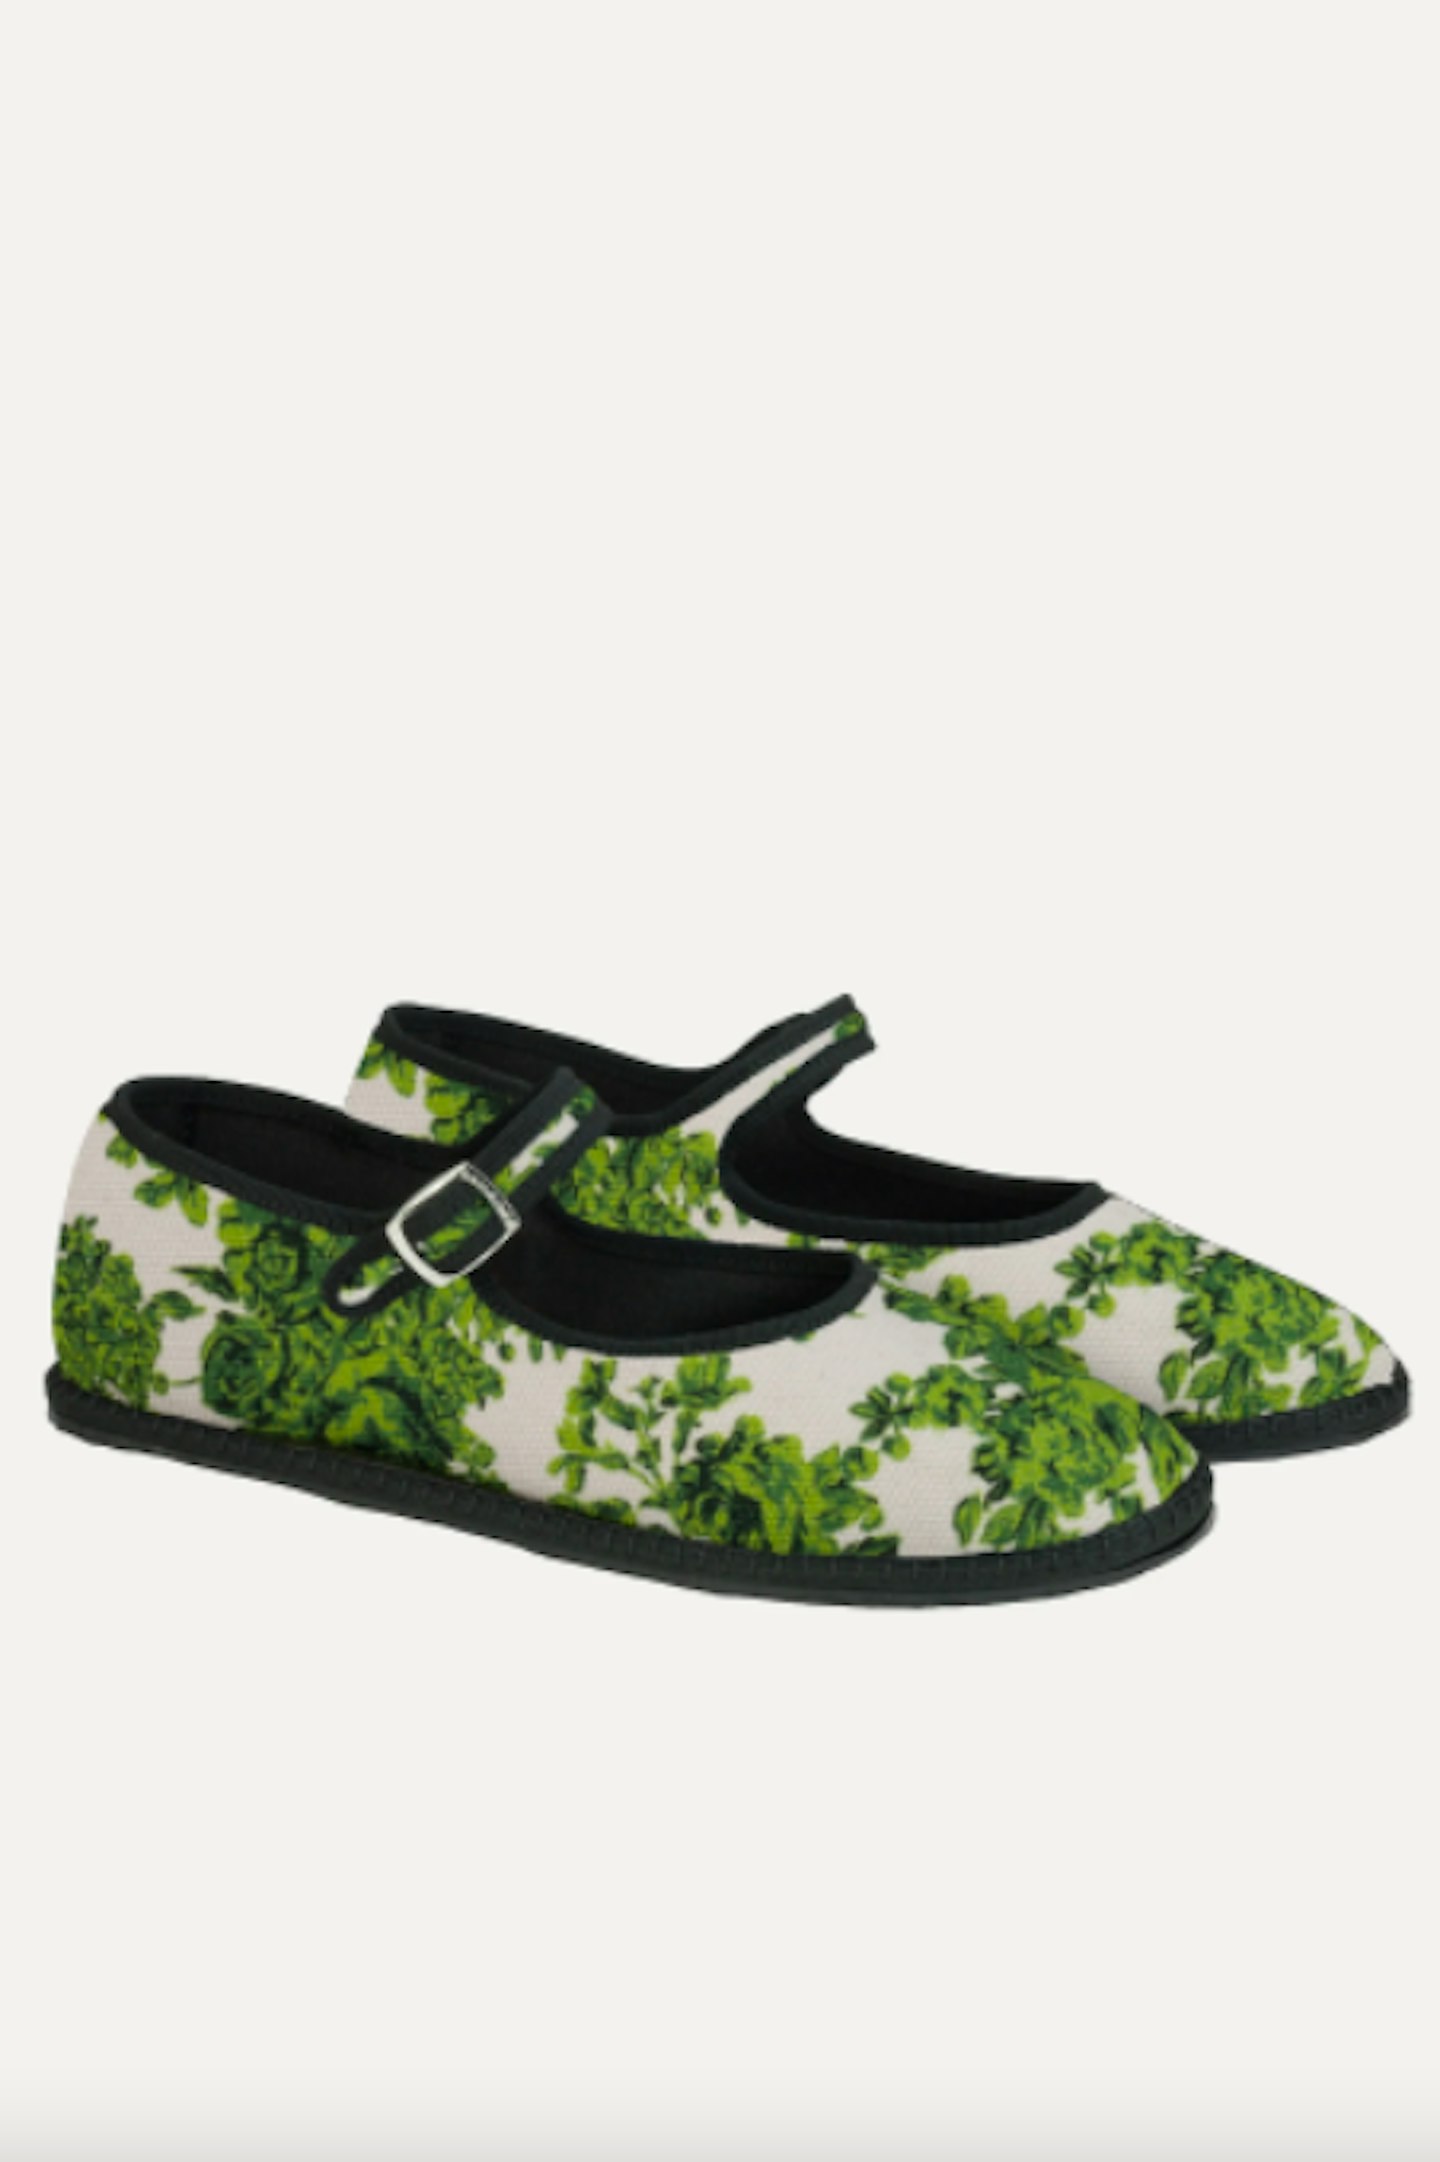 Green Floral Mary-Jane Shoes, £140